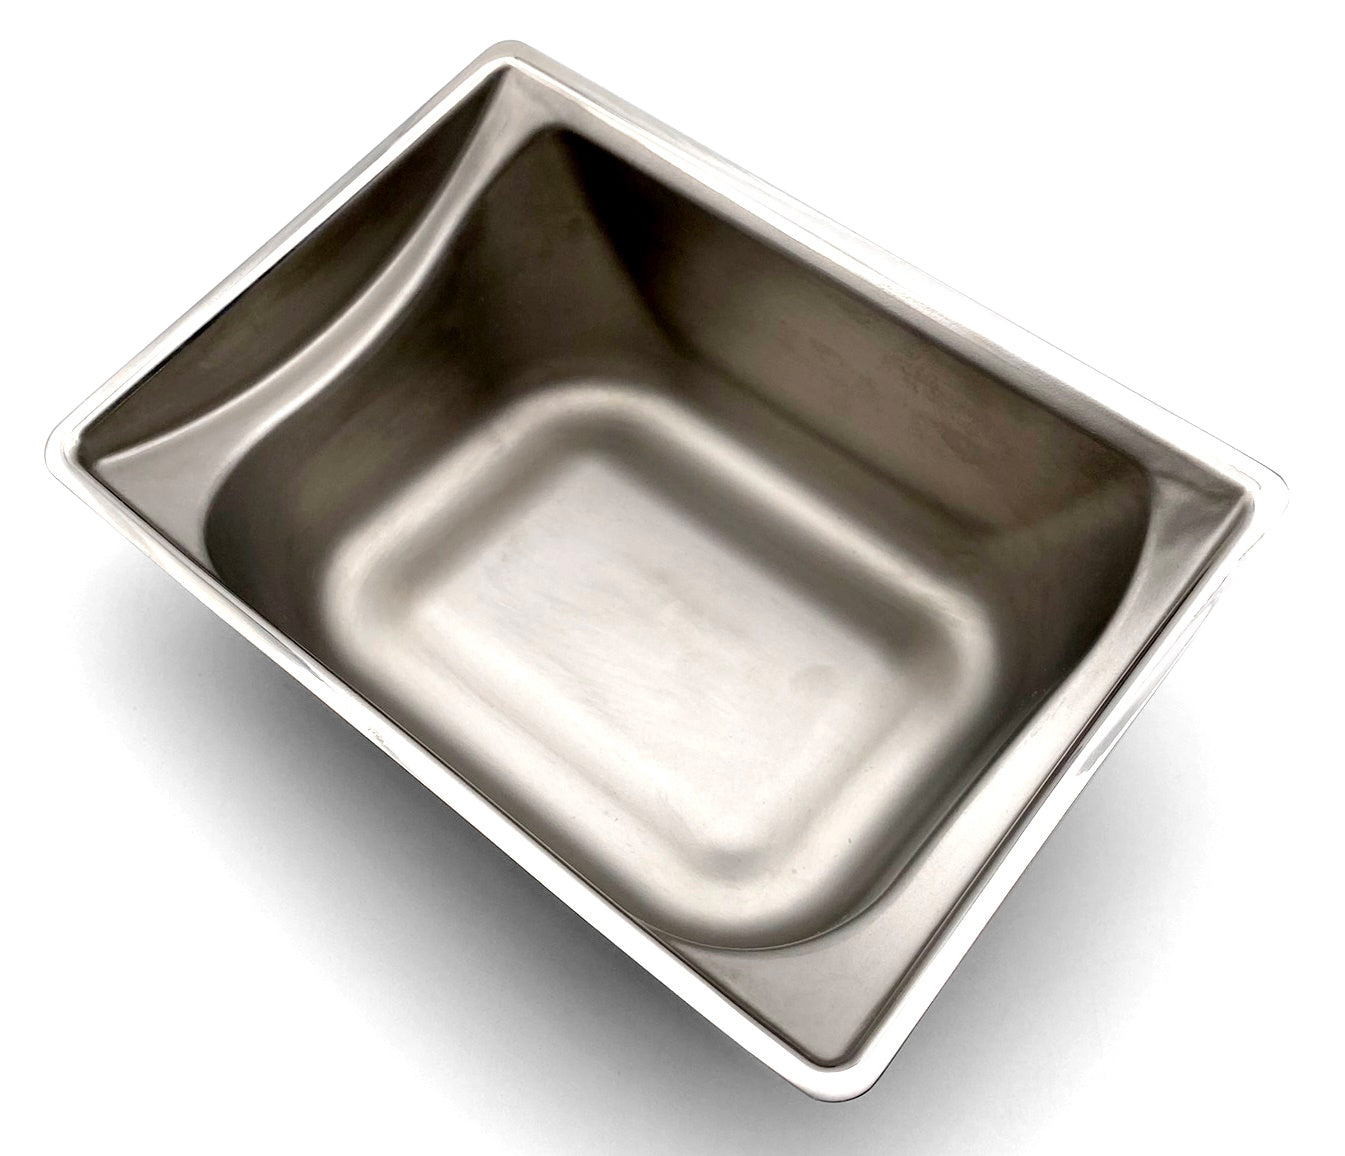 Image of Stainless Steel Bowl Inserts x 2 for Closer Pets MiBowl Automatic Microchip Pet Feeder (CP504)